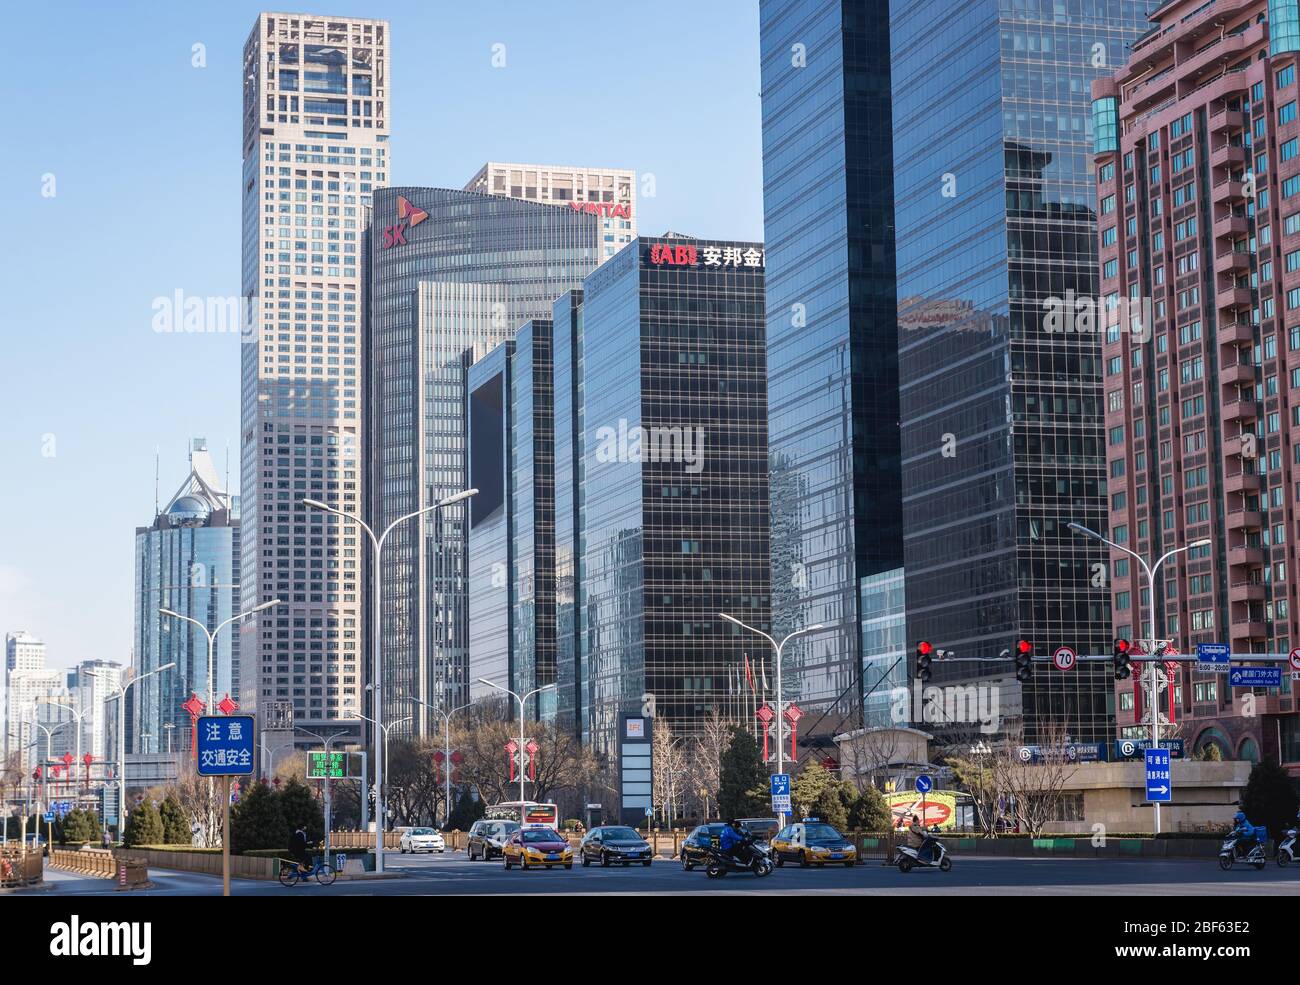 Beijing central business district, China - view with Yintai Center, SK Tower, International Financial Center, Anbang Insurance builgins Stock Photo